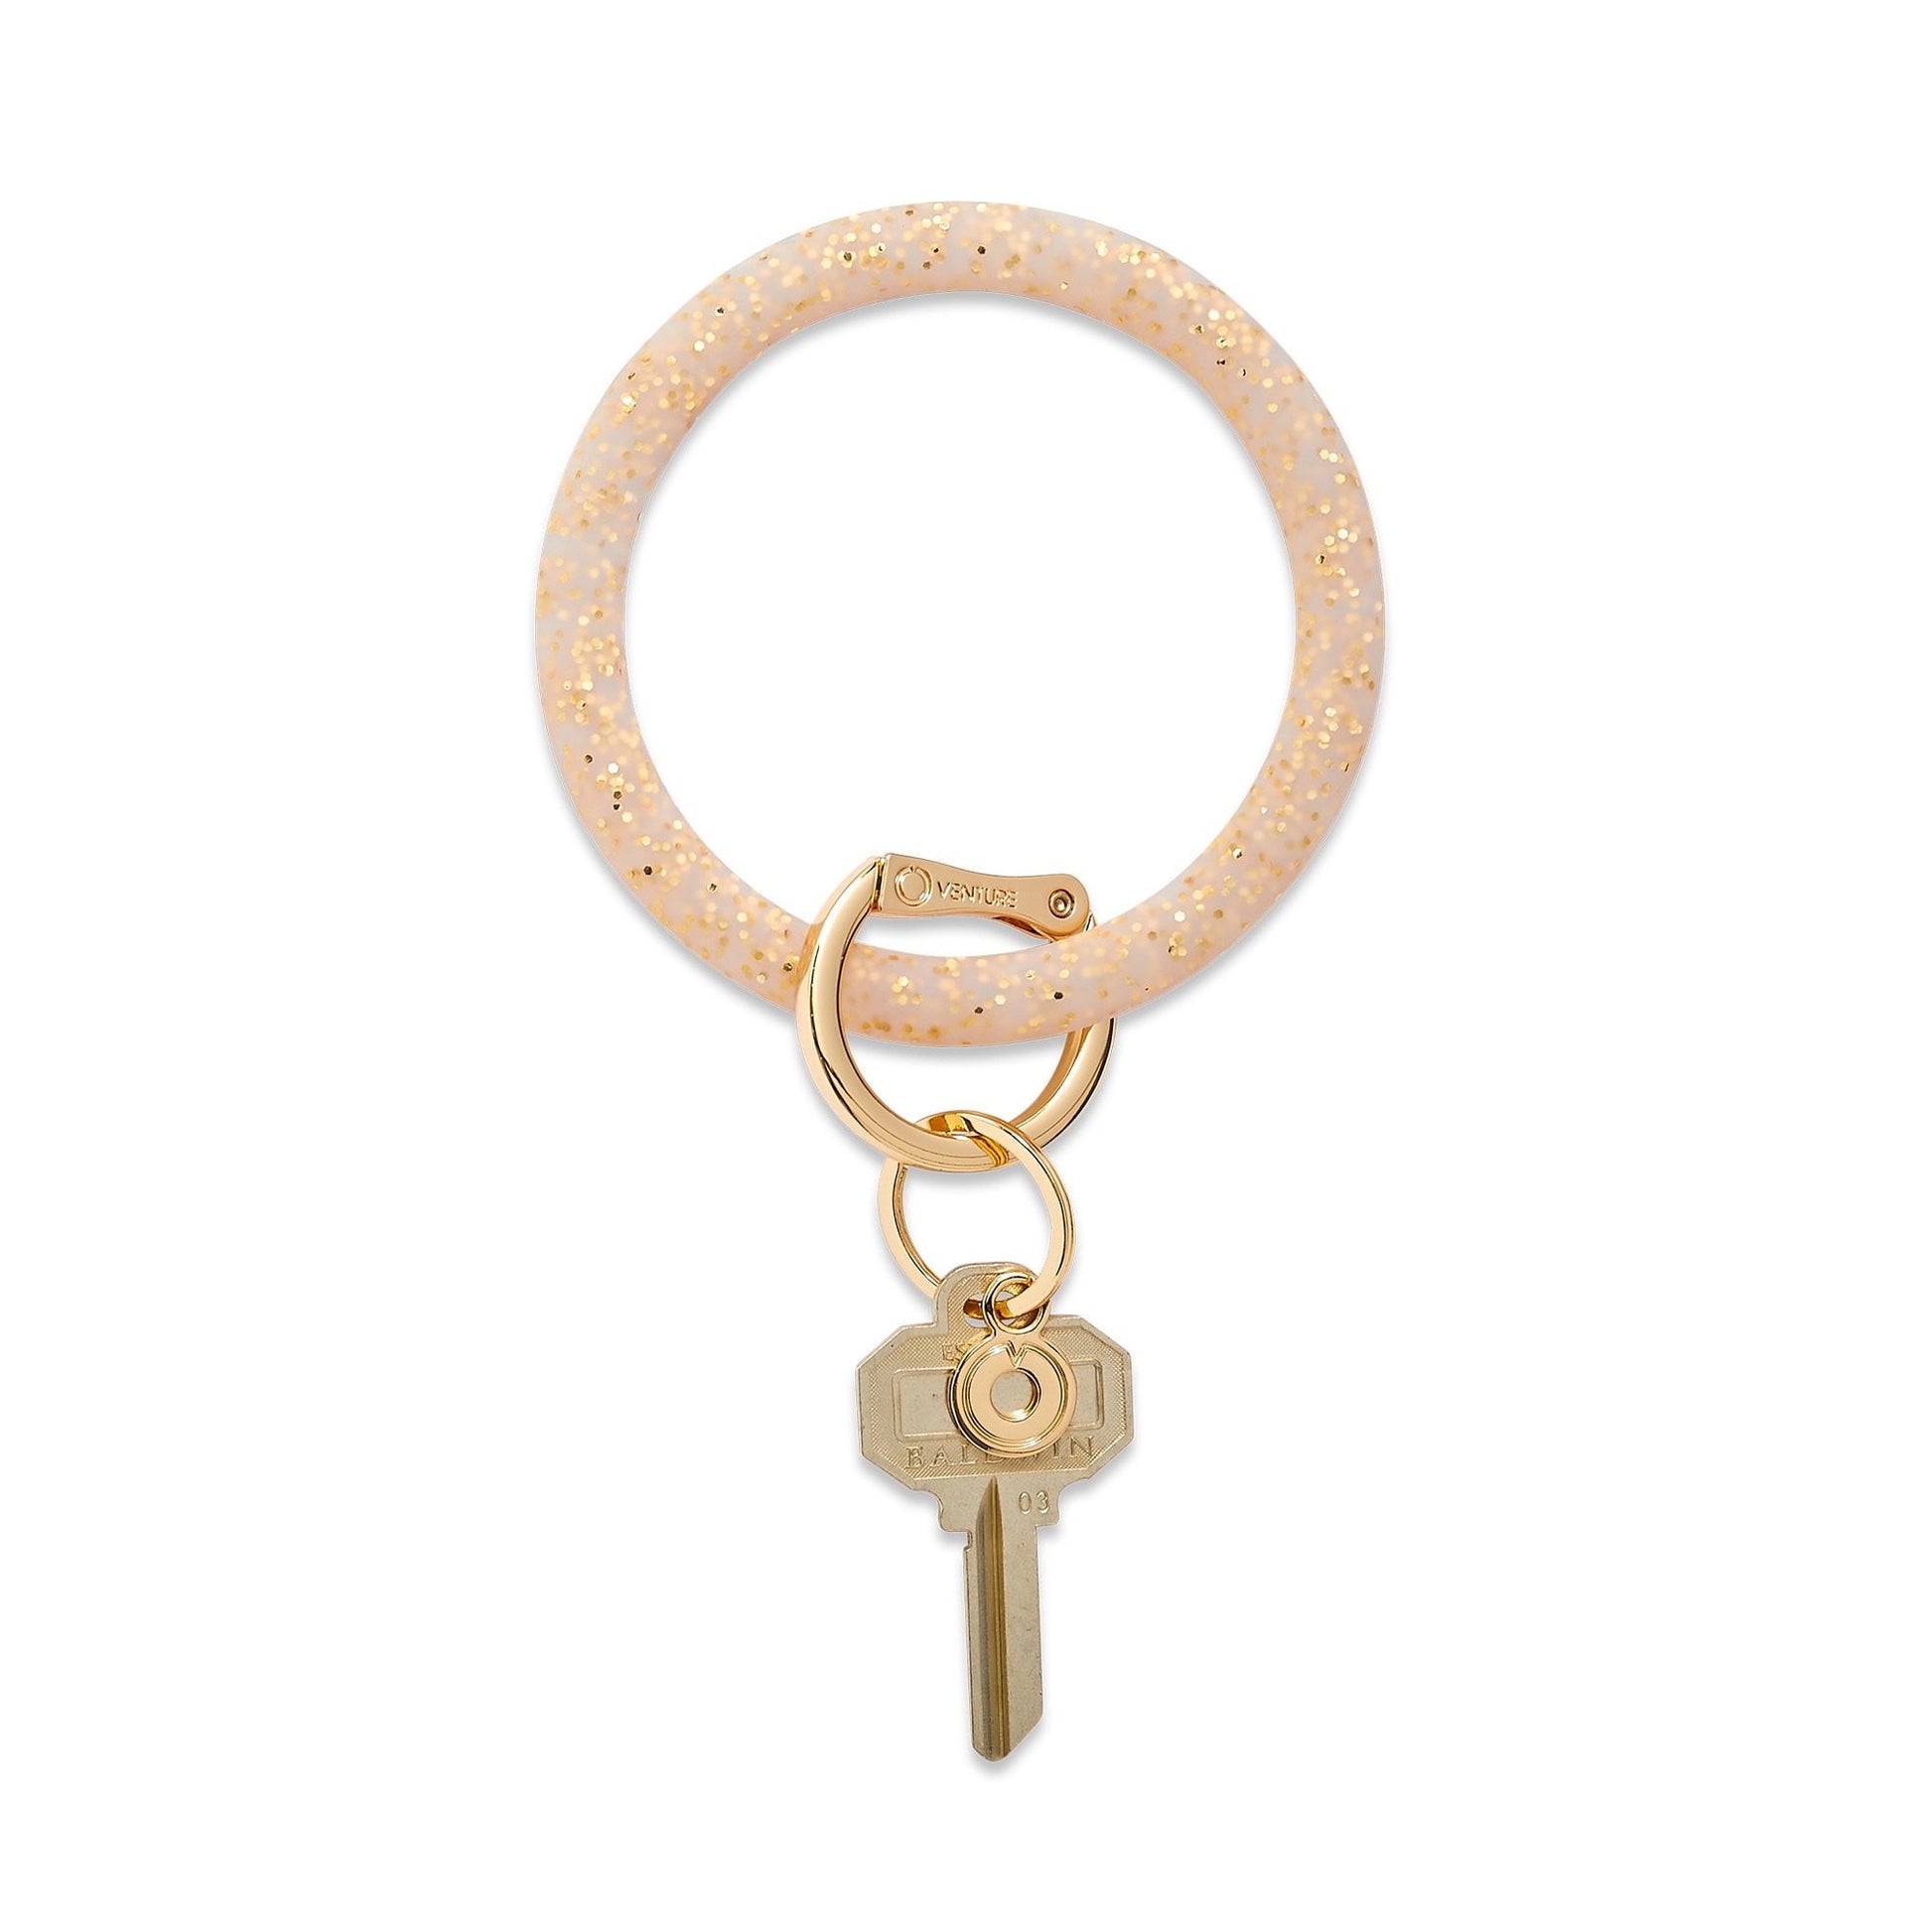 Oventure Silicone Big O Key Ring - Solid Gold Rush Braided